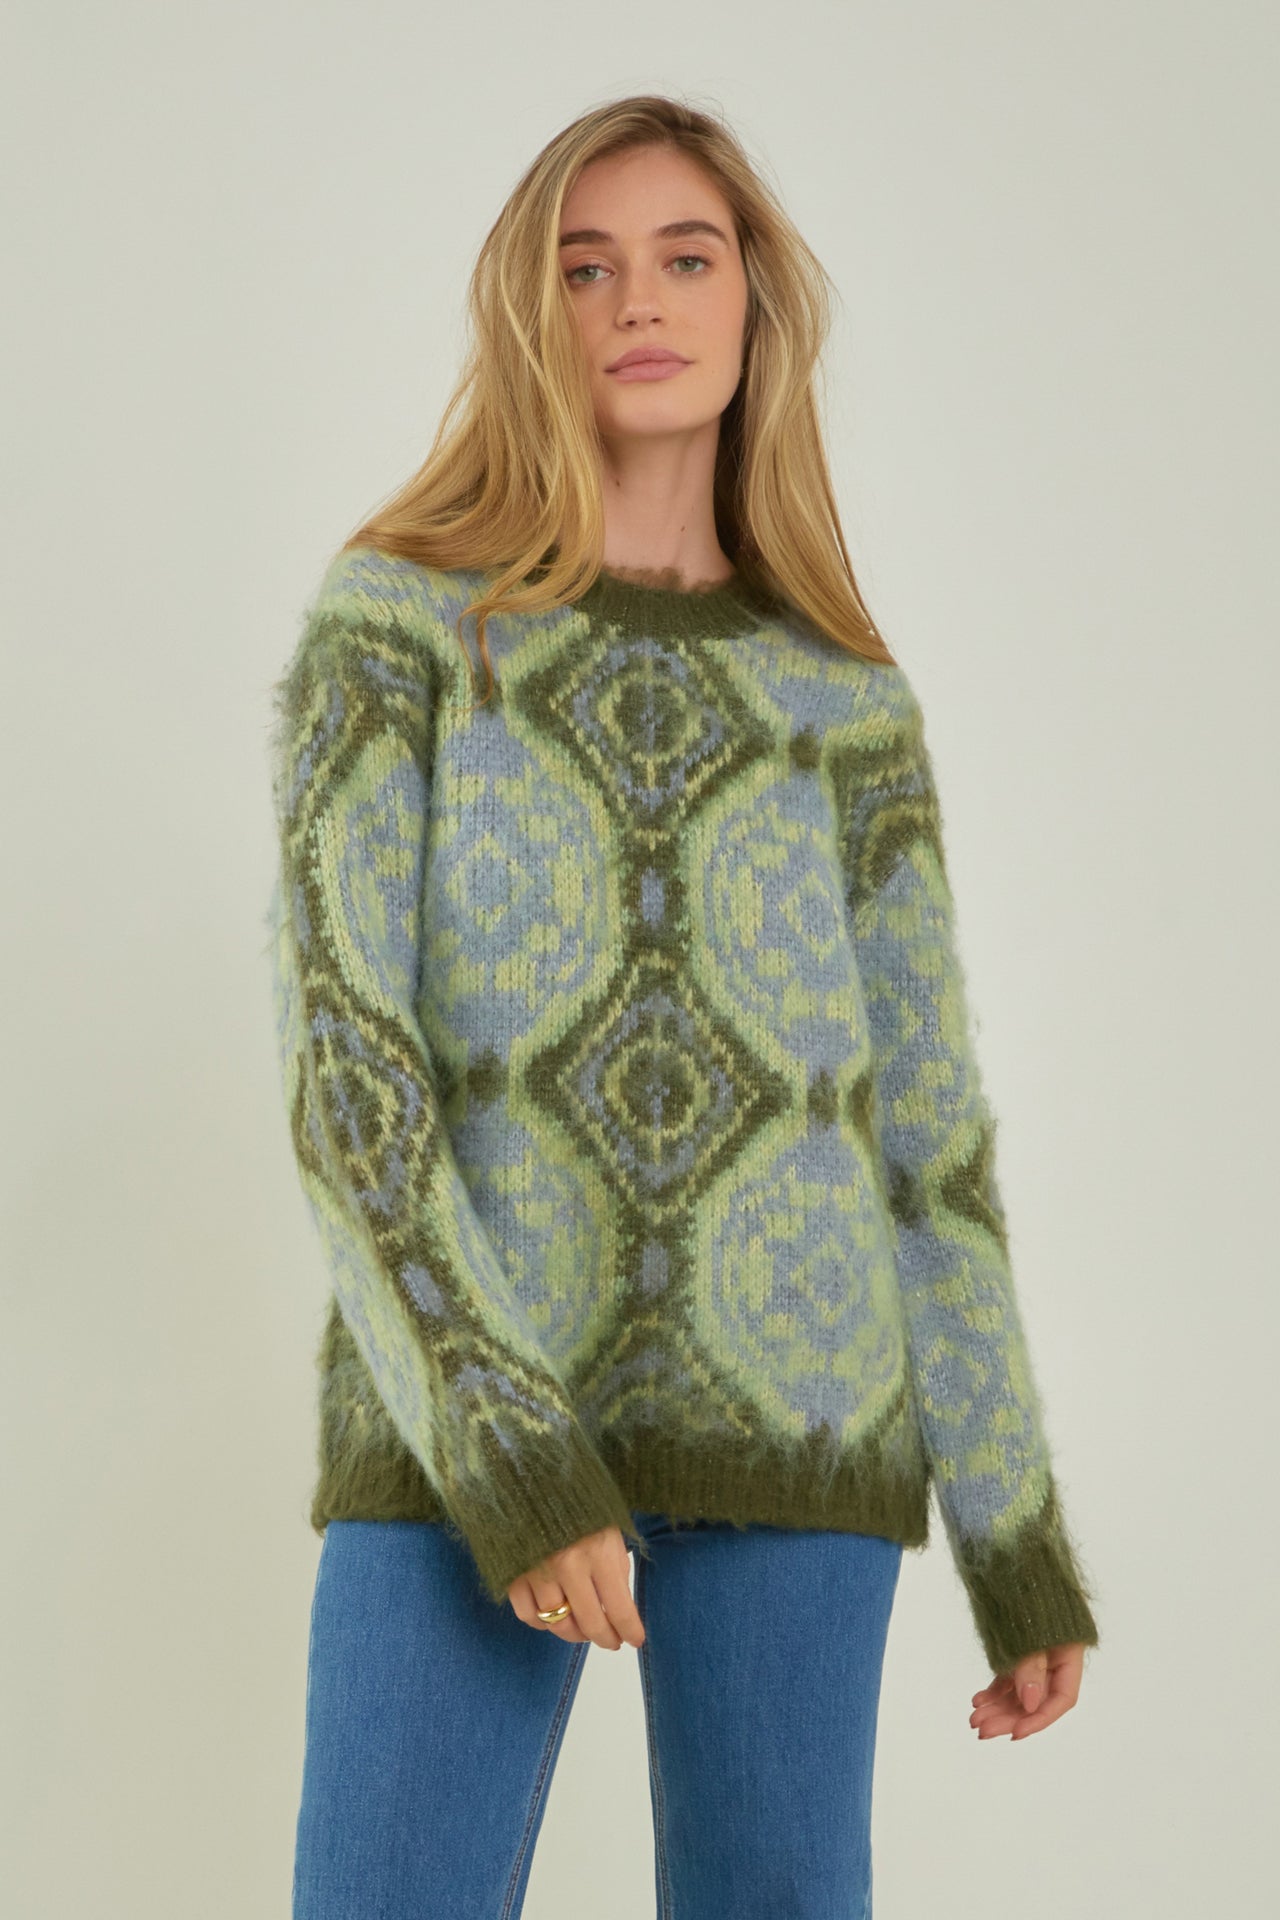 Karoline's Knits Ep 6 // Knitting for Olive Darling Wrap, Fern Sweater, and  Office Sweater 